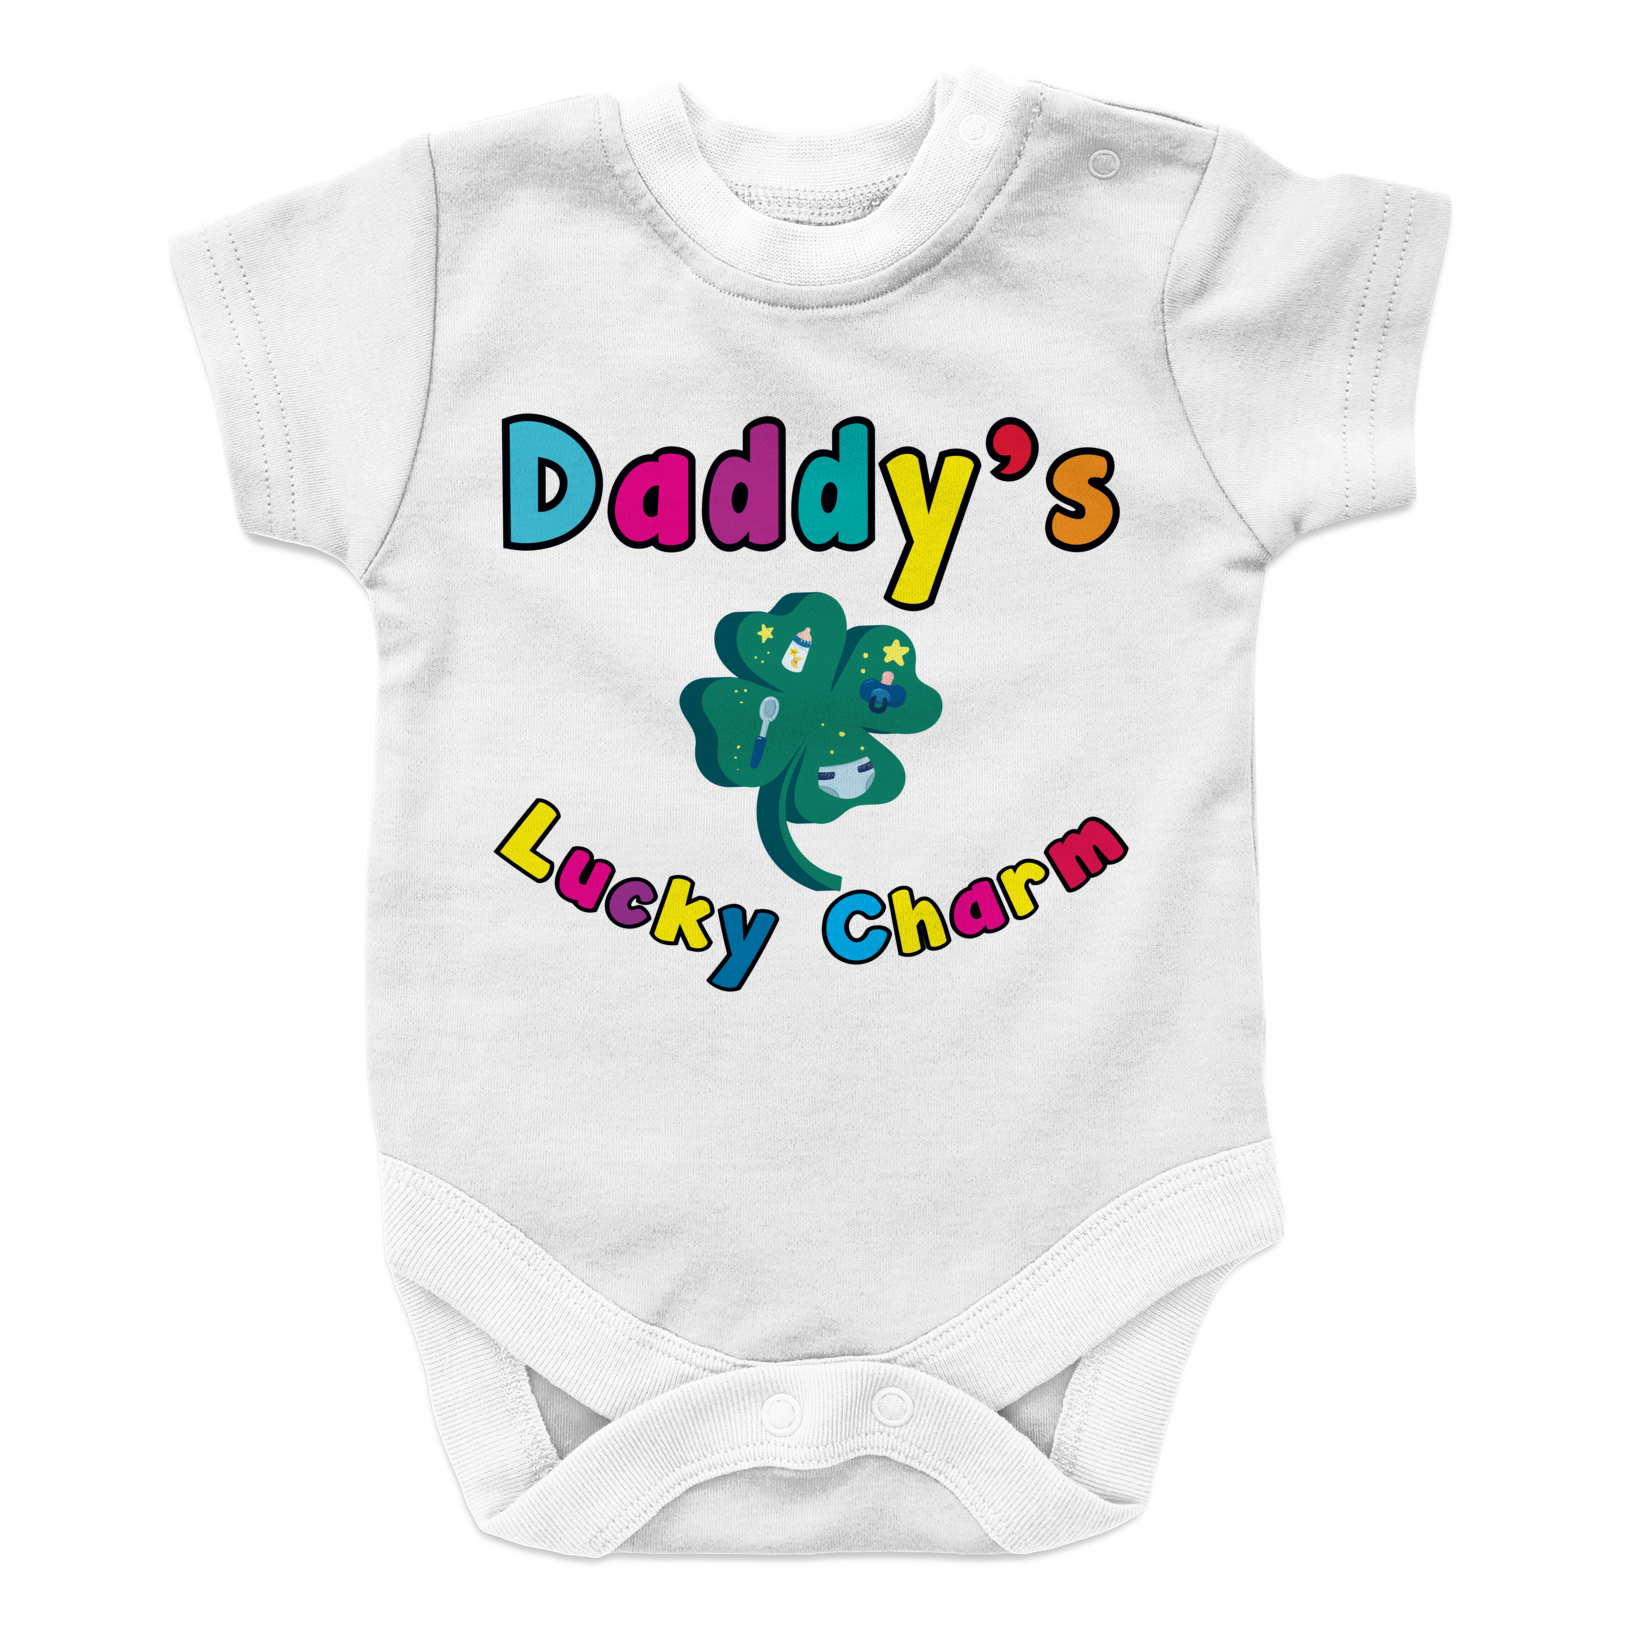 Daddy's Lucky -2 Baby Onesie